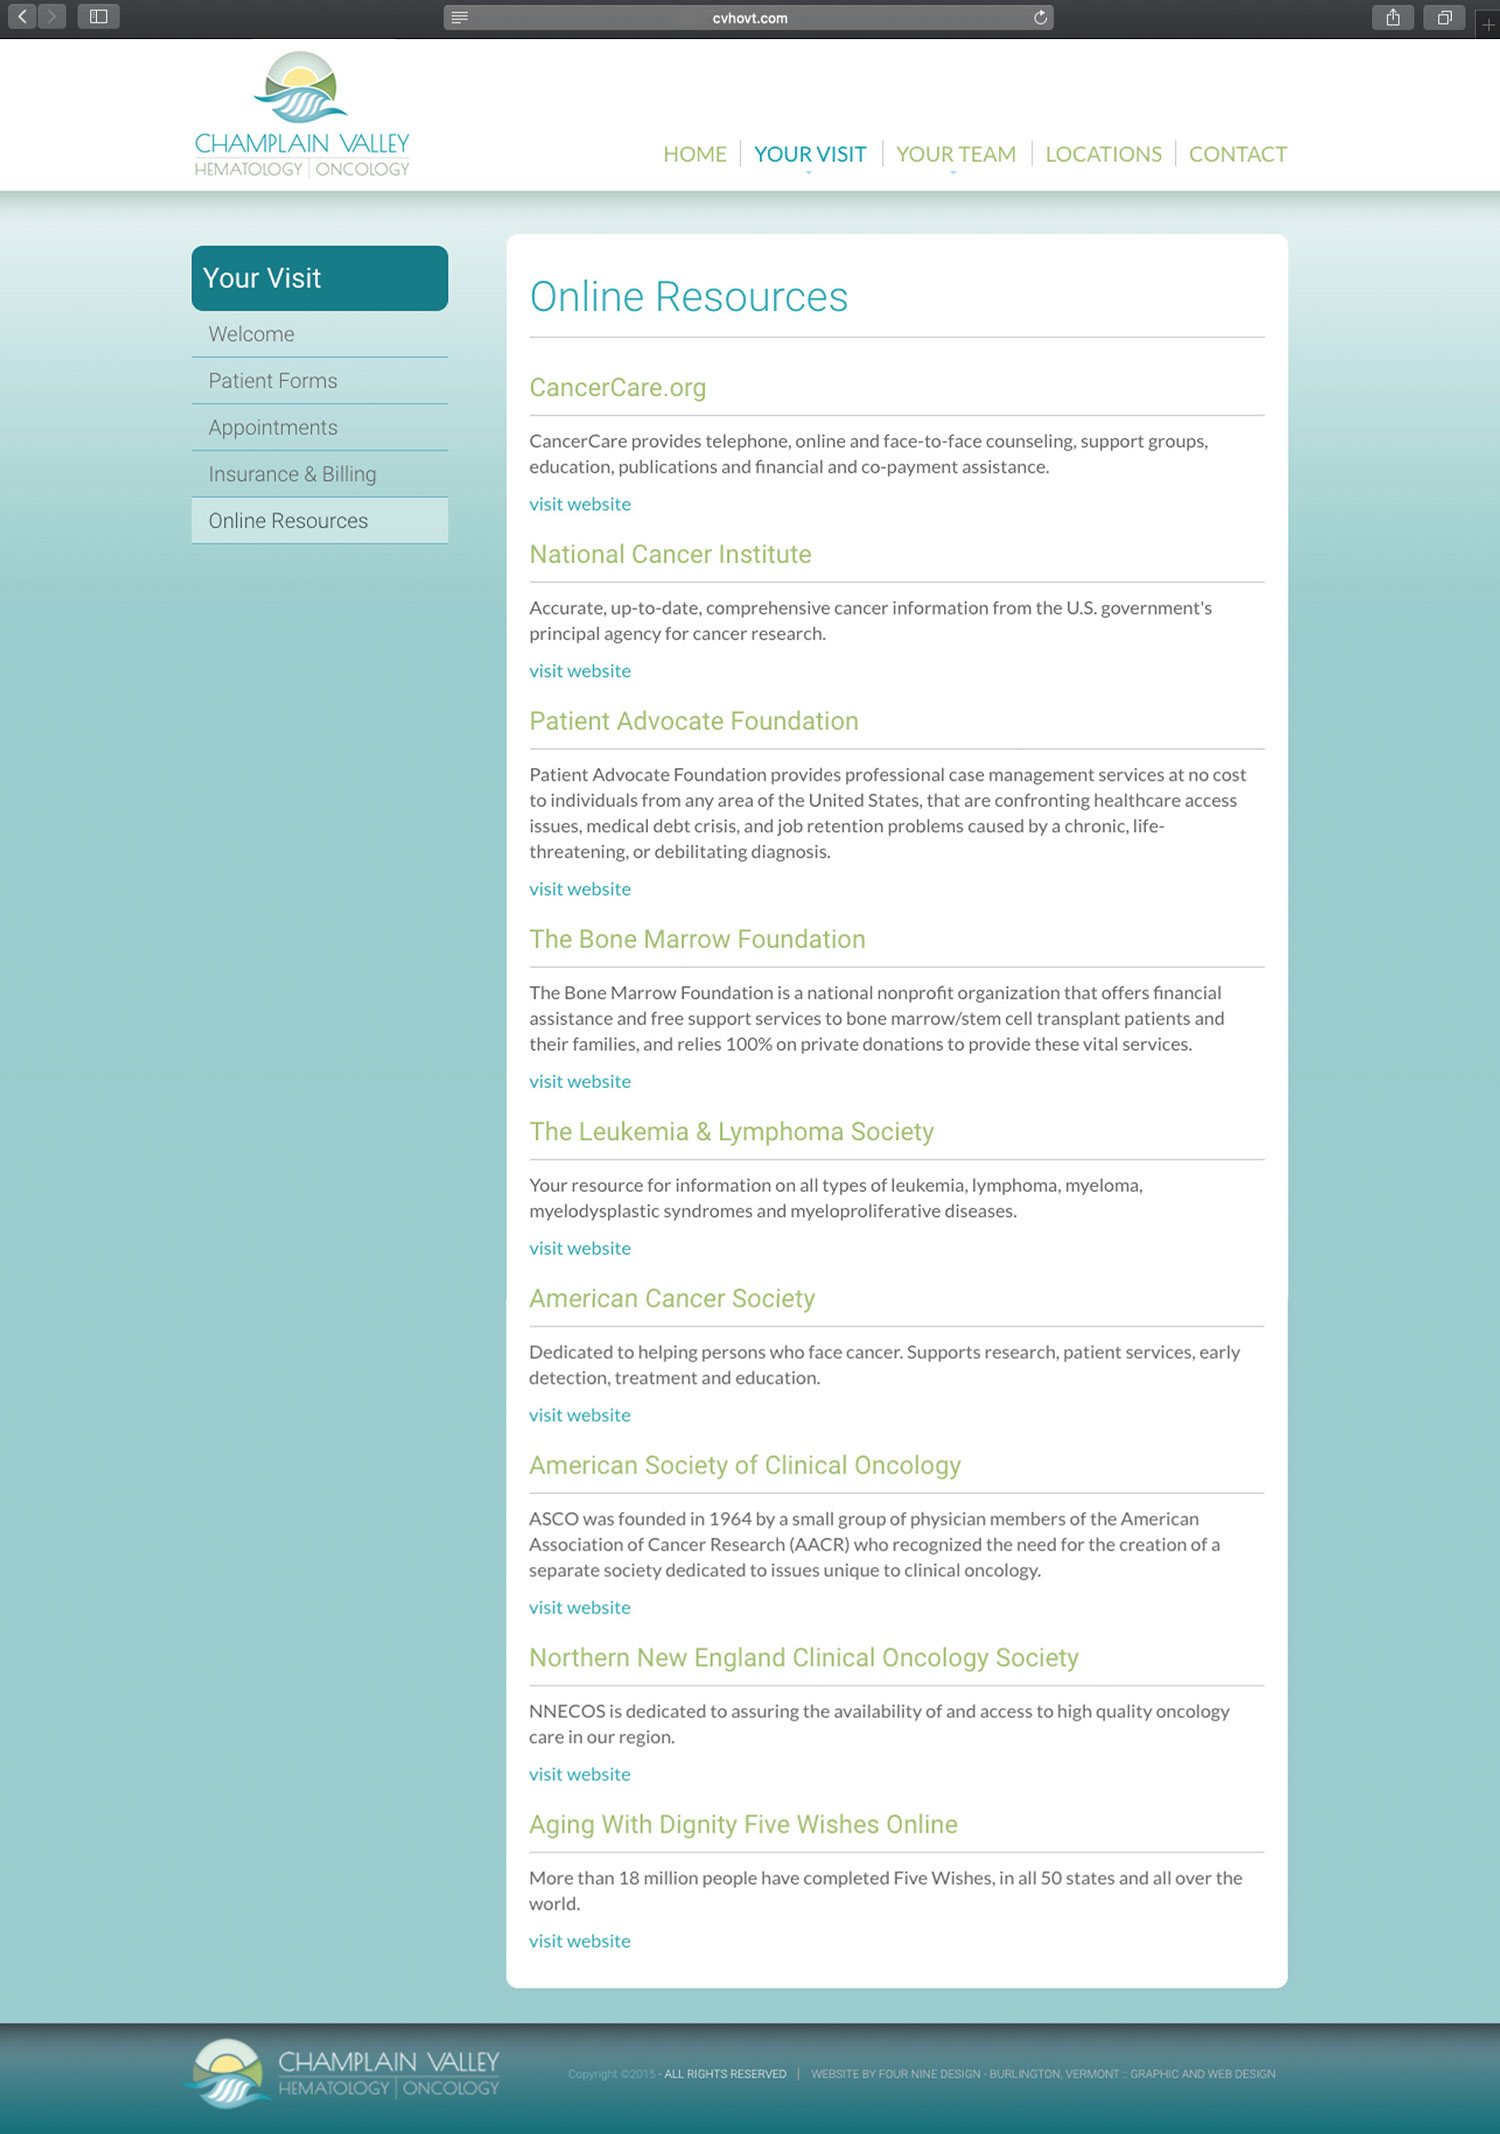 Website design and website development for Champlain Valley Hematology and Oncology - secondary page view.